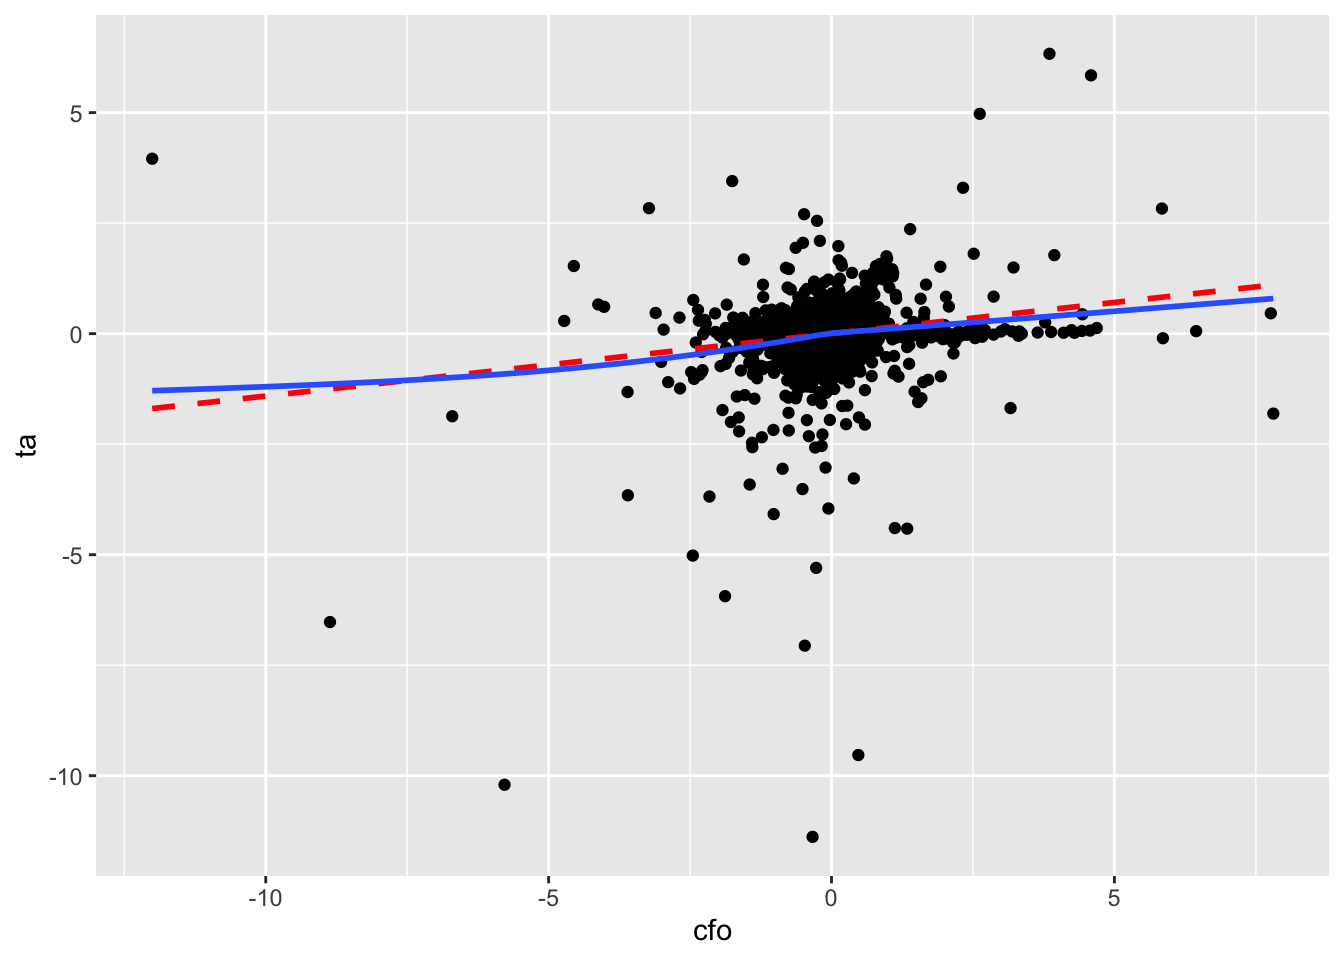 Scatter plot applying FWL theorem to multivariate regression with cash flow from operations (CFO) on the x-axis and total accruals on the y-axis. Fitted line represents coefficient on CFO from multivariate regression. No relationship is obvious from scatterplot points.